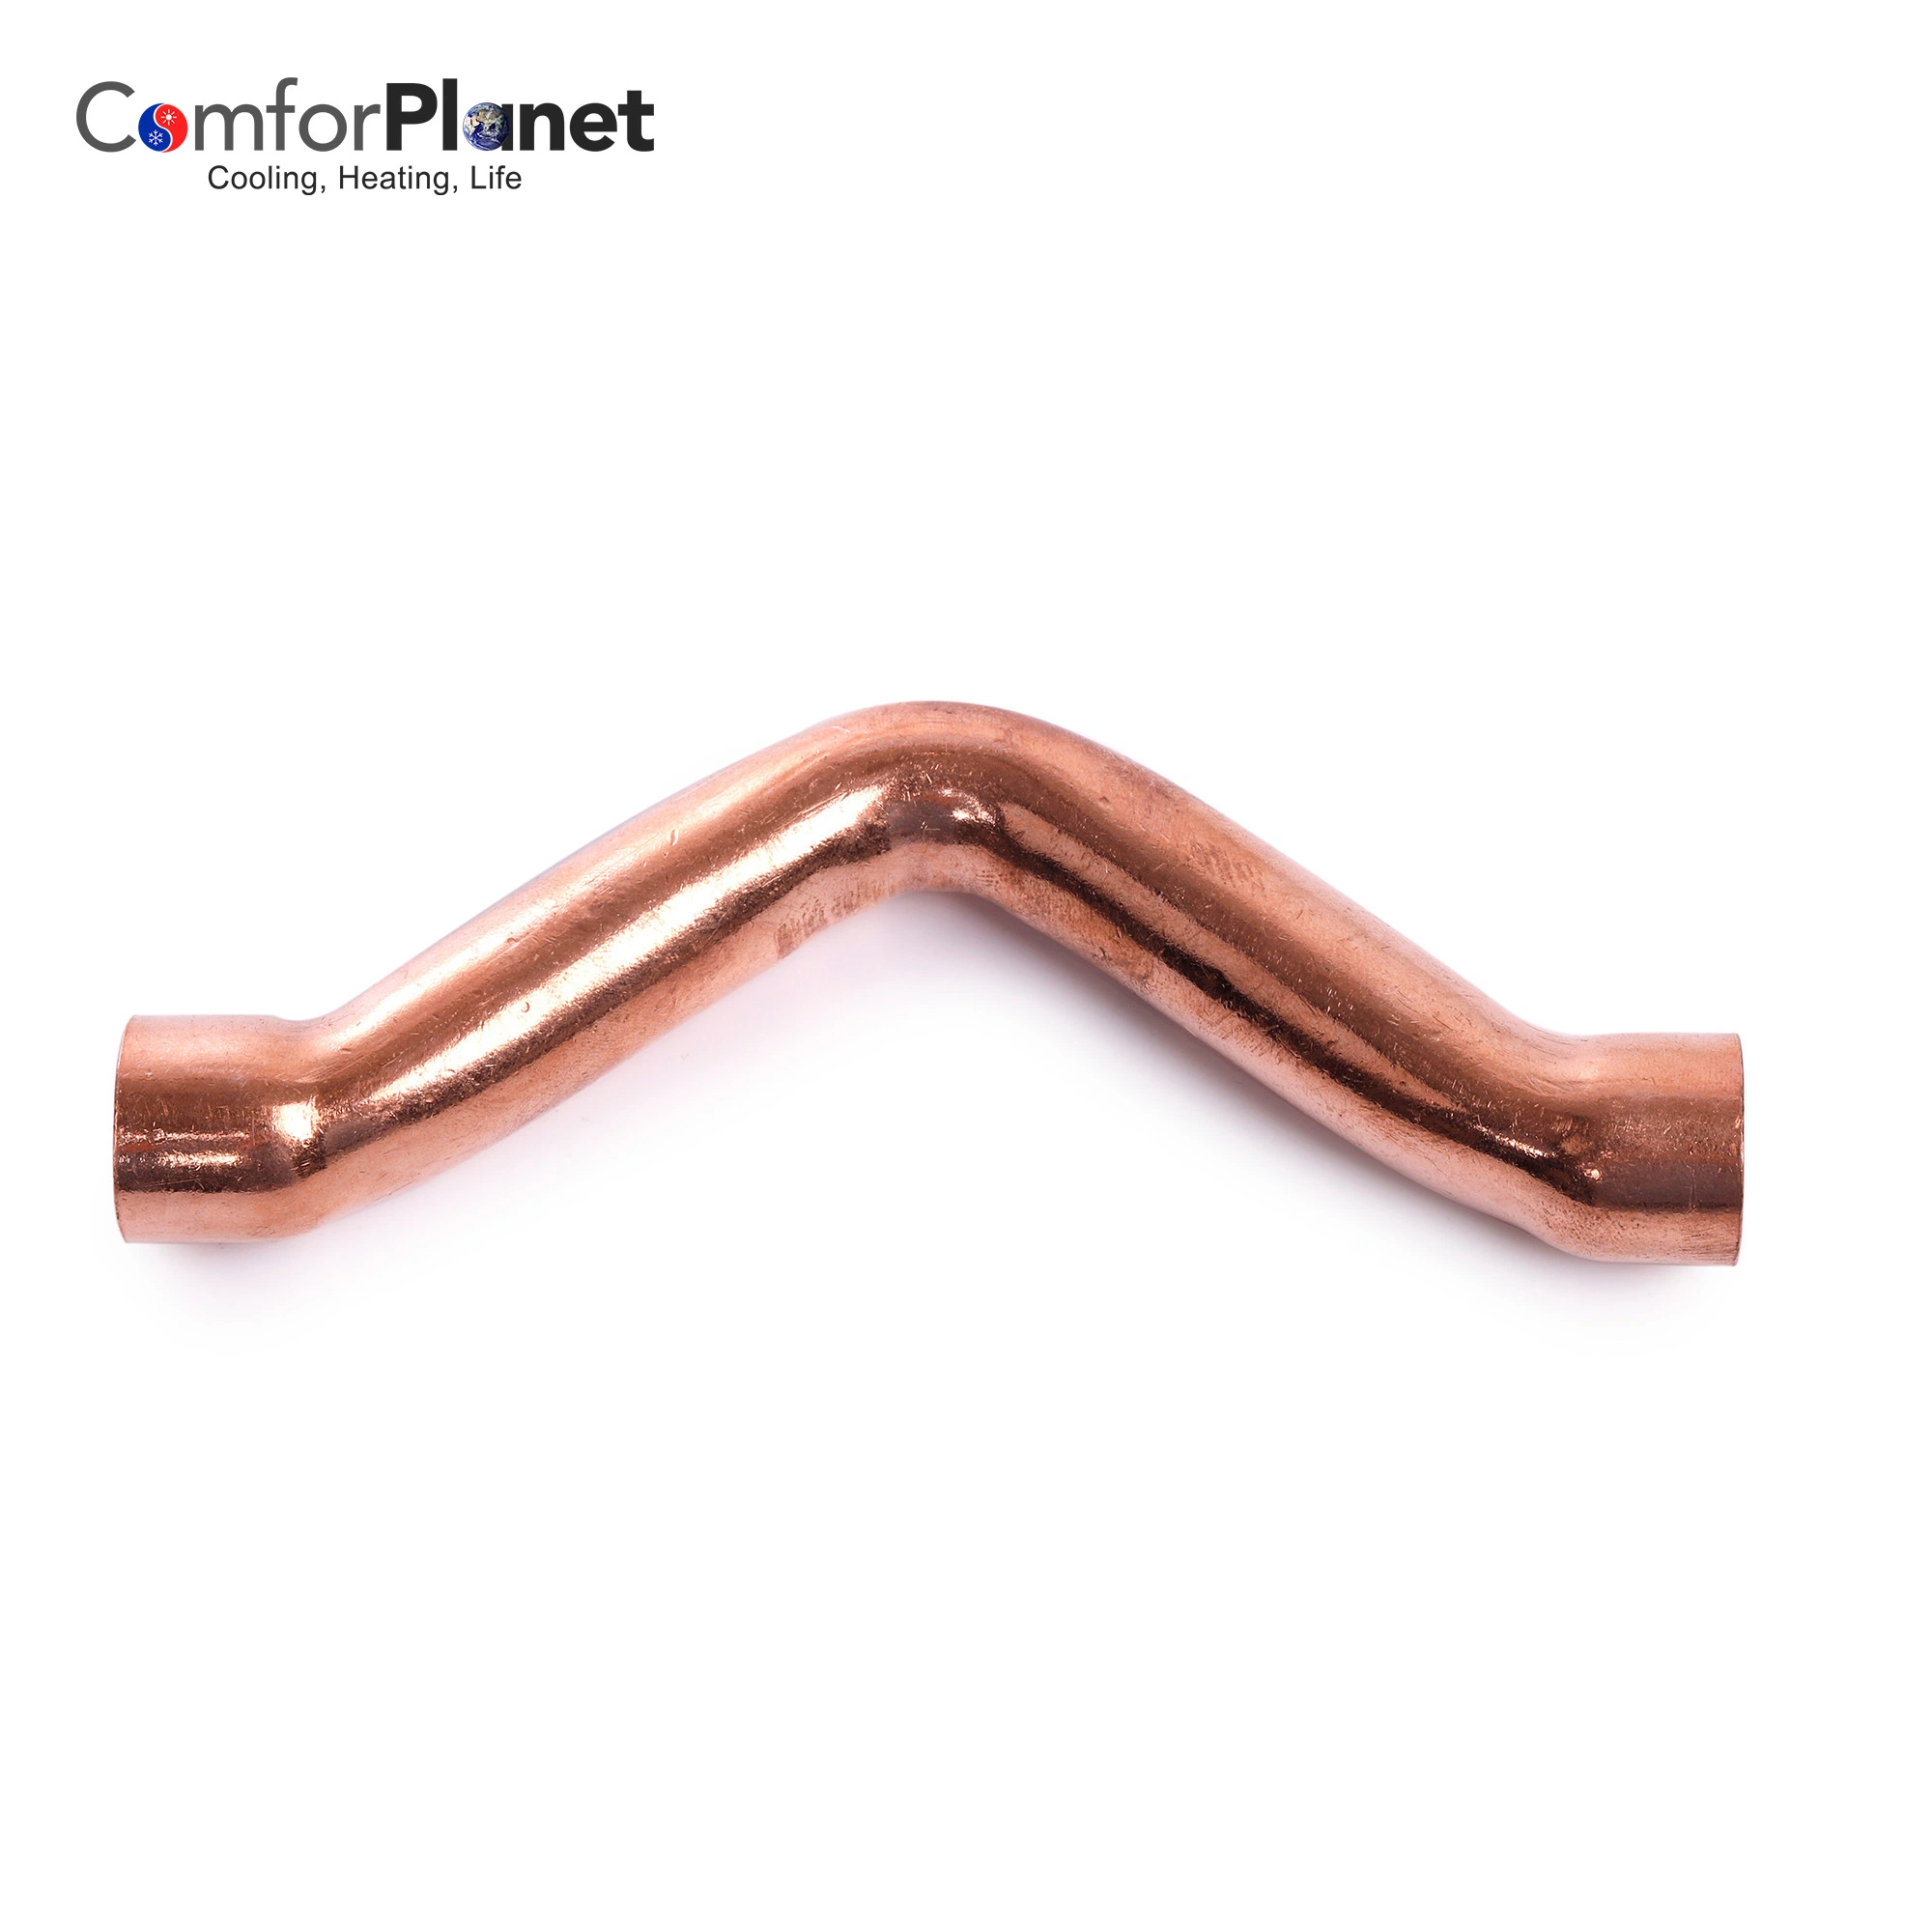 Wholesale Copper Fitting Cross-Over Coupling C&times; C Pipe Fittings Refrigeration Custom Copper Pipe Fittings